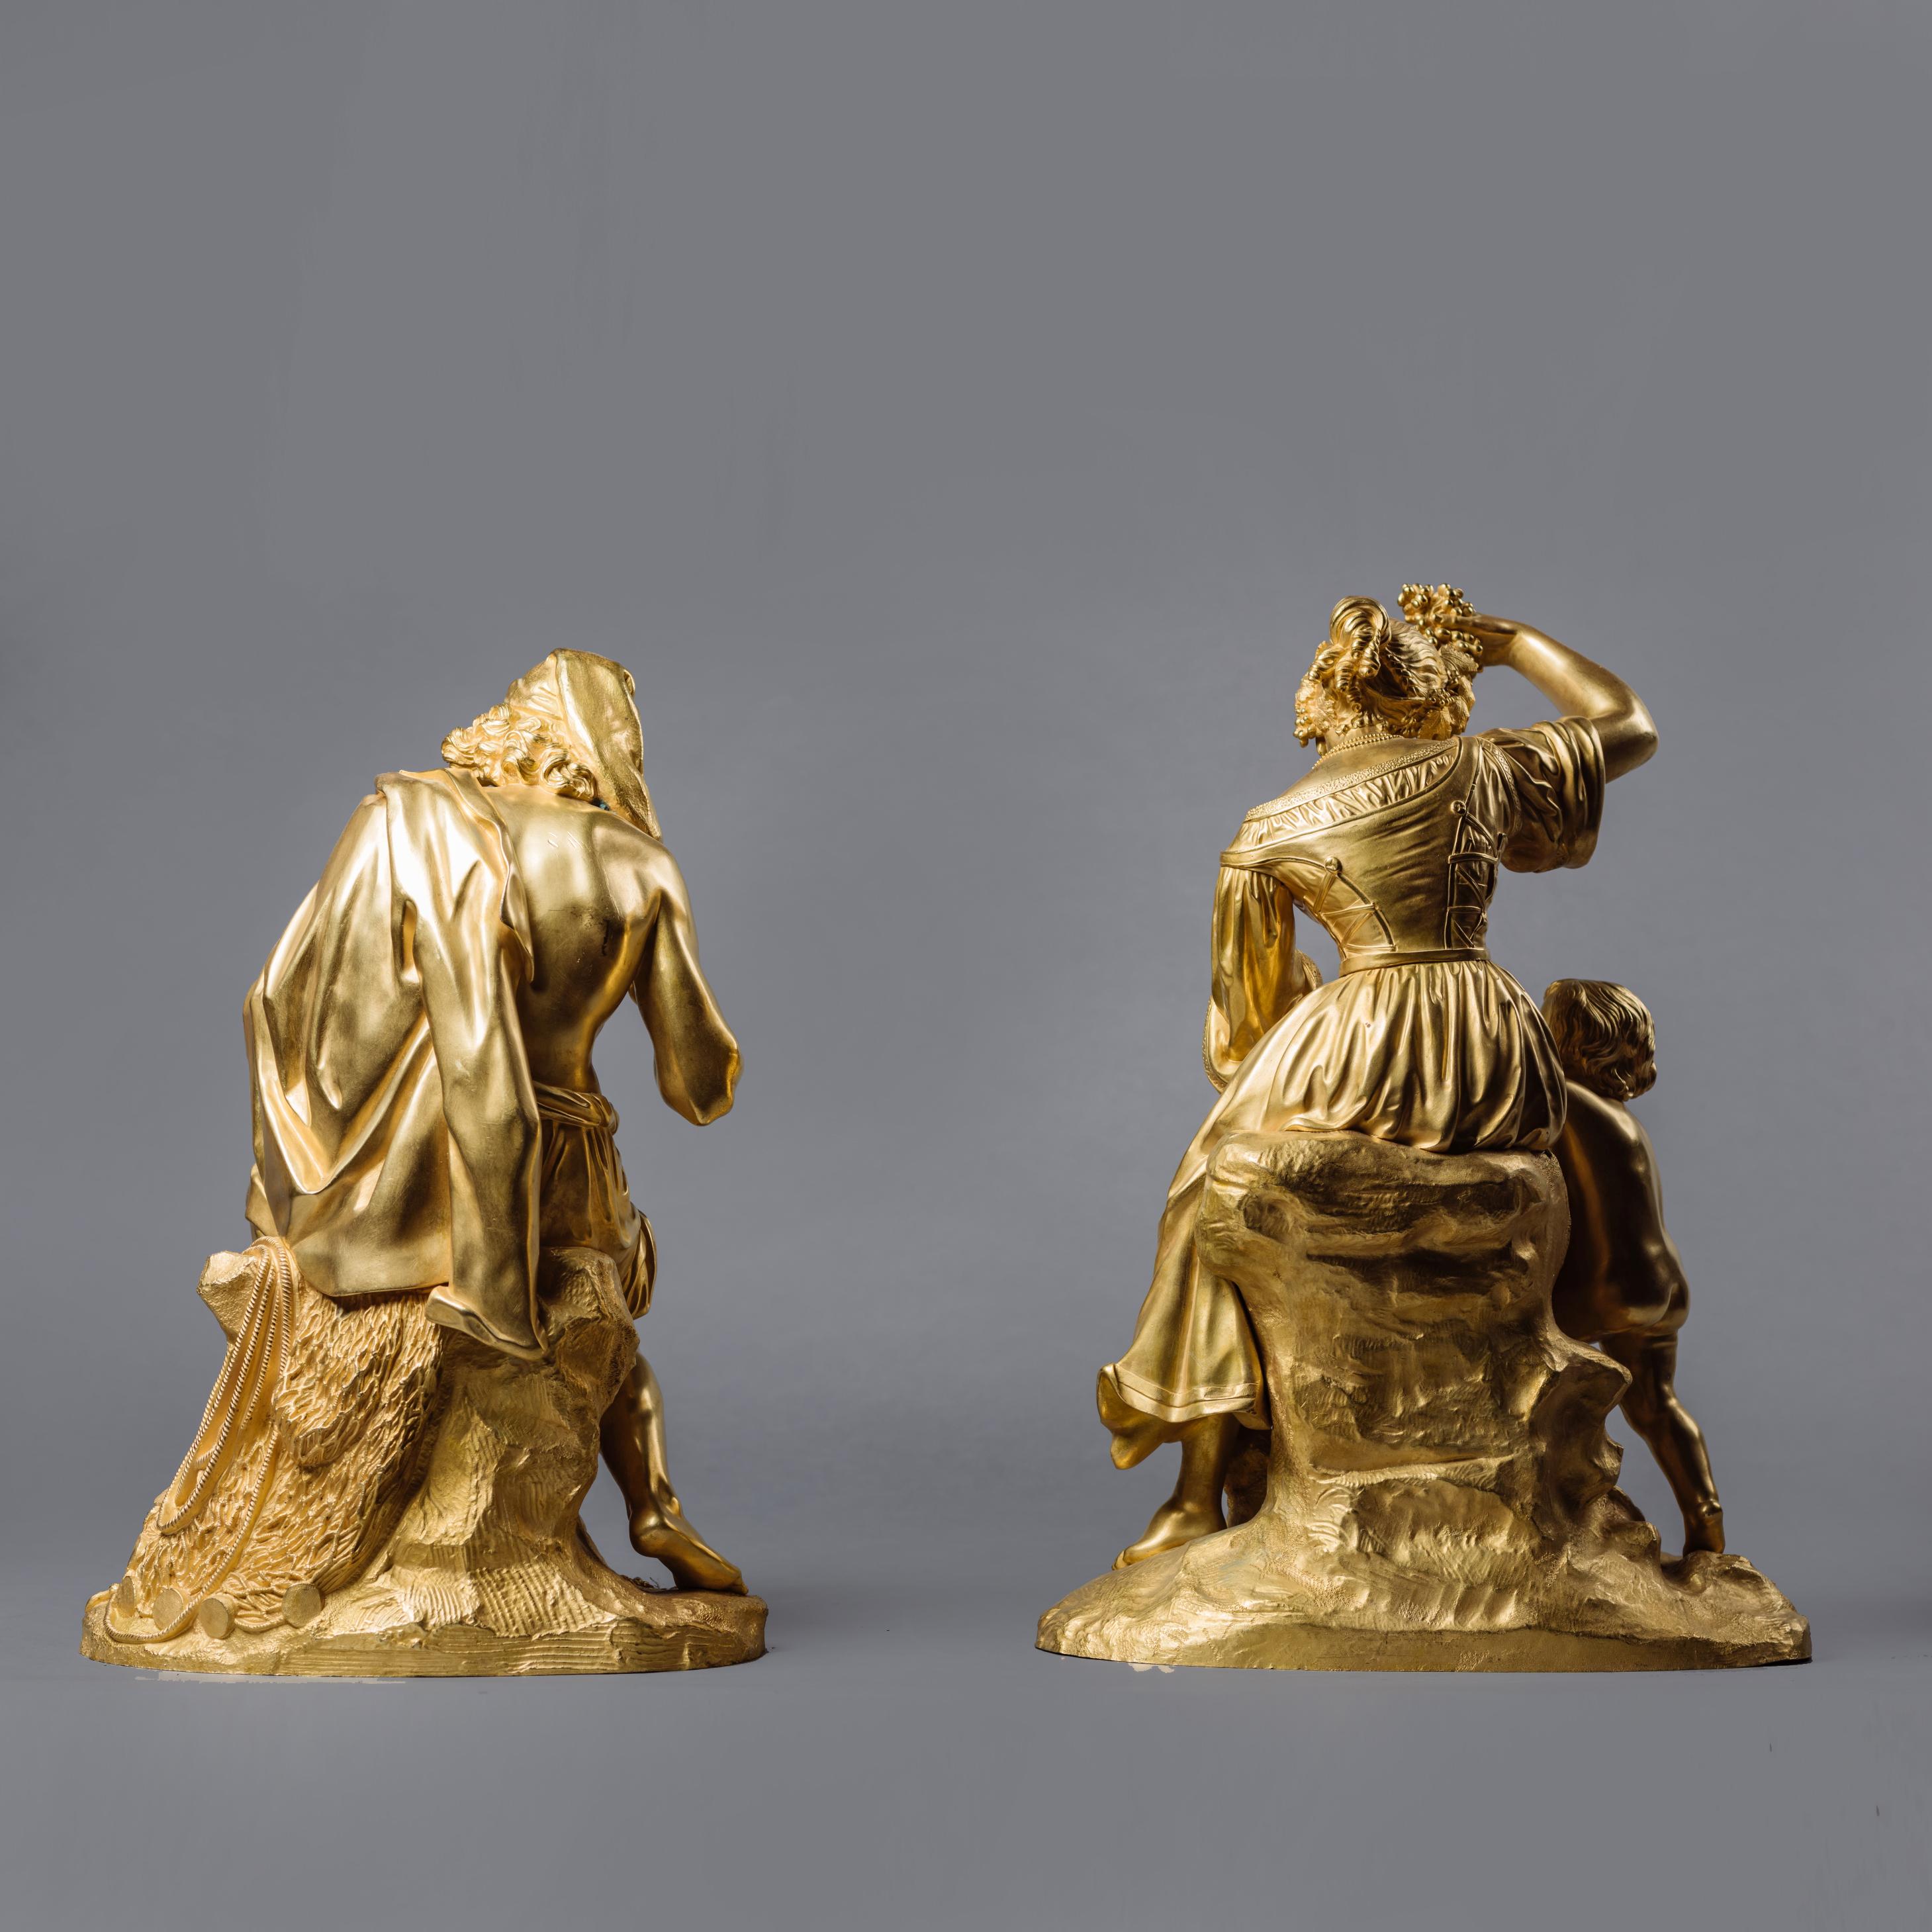 19th Century Pair of Restoration Period Gilt-Bronze Allegorical Groups. French, circa 1830 For Sale